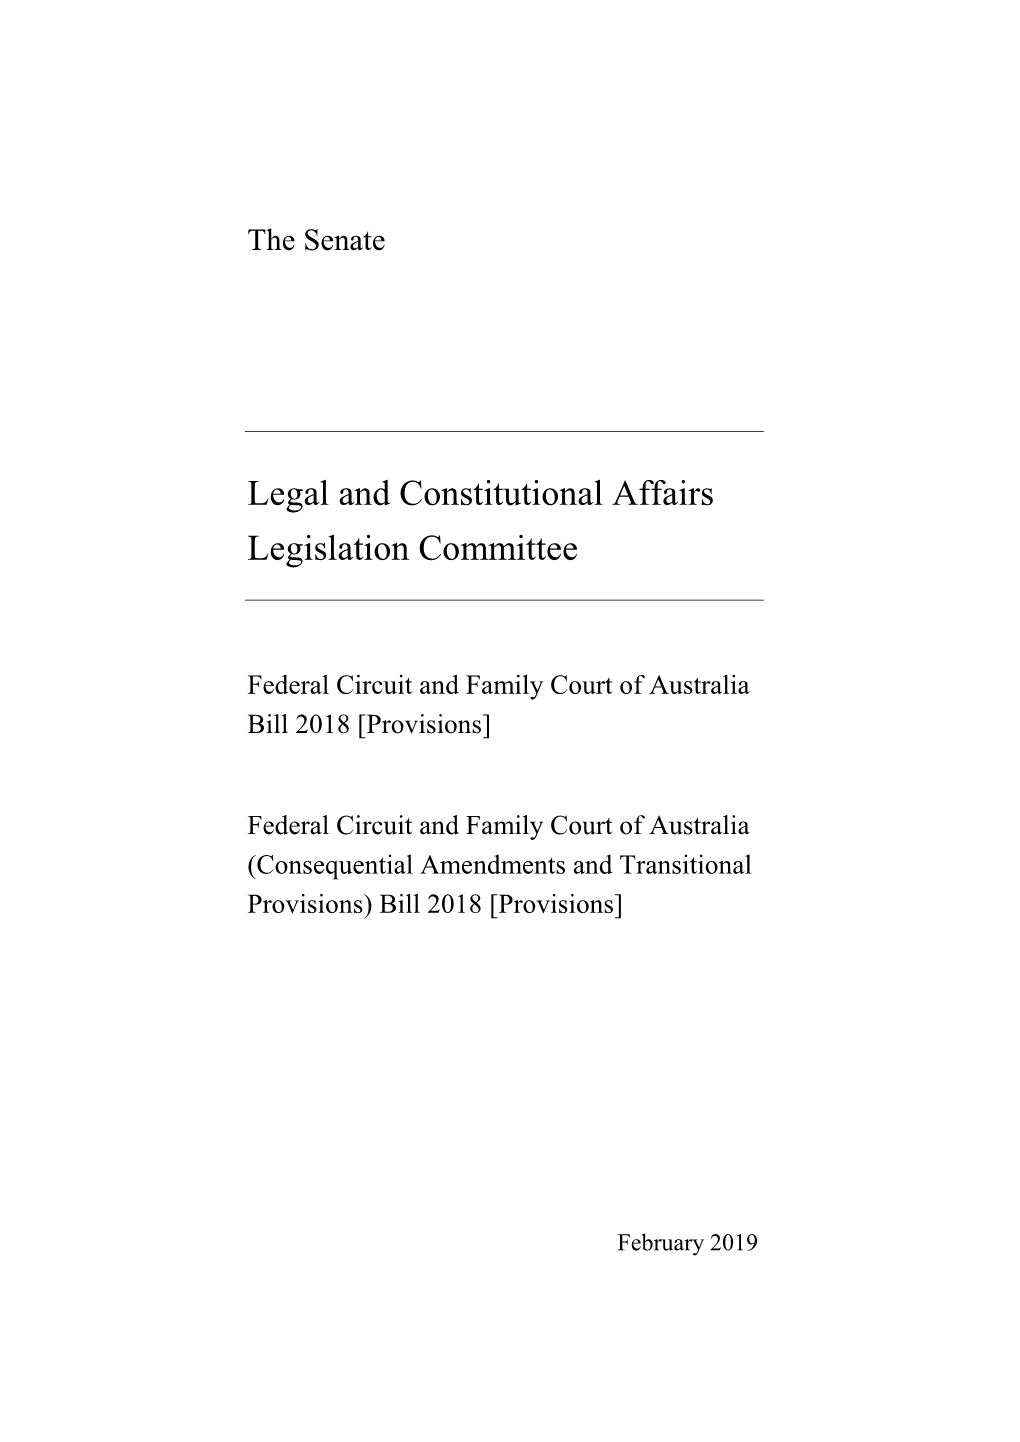 Federal Circuit and Family Court of Australia Bill 2018 [Provisions]